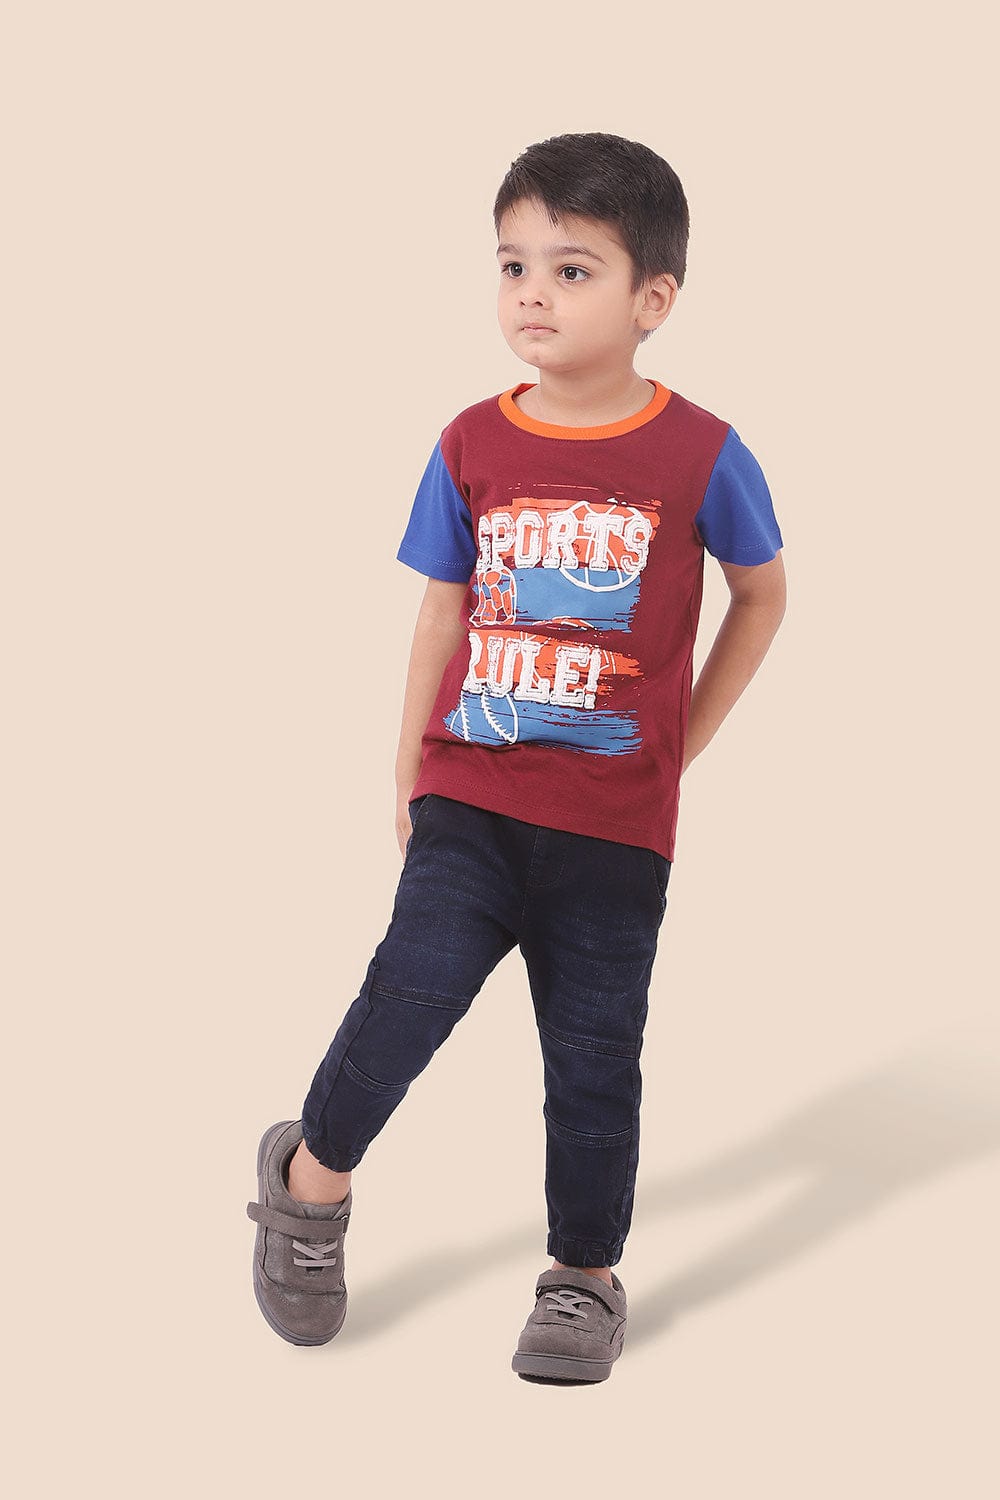 Hope Not Out by Shahid Afridi Boys Knit T-Shirt Puff Printed Sports Rule Graphic T-Shirt